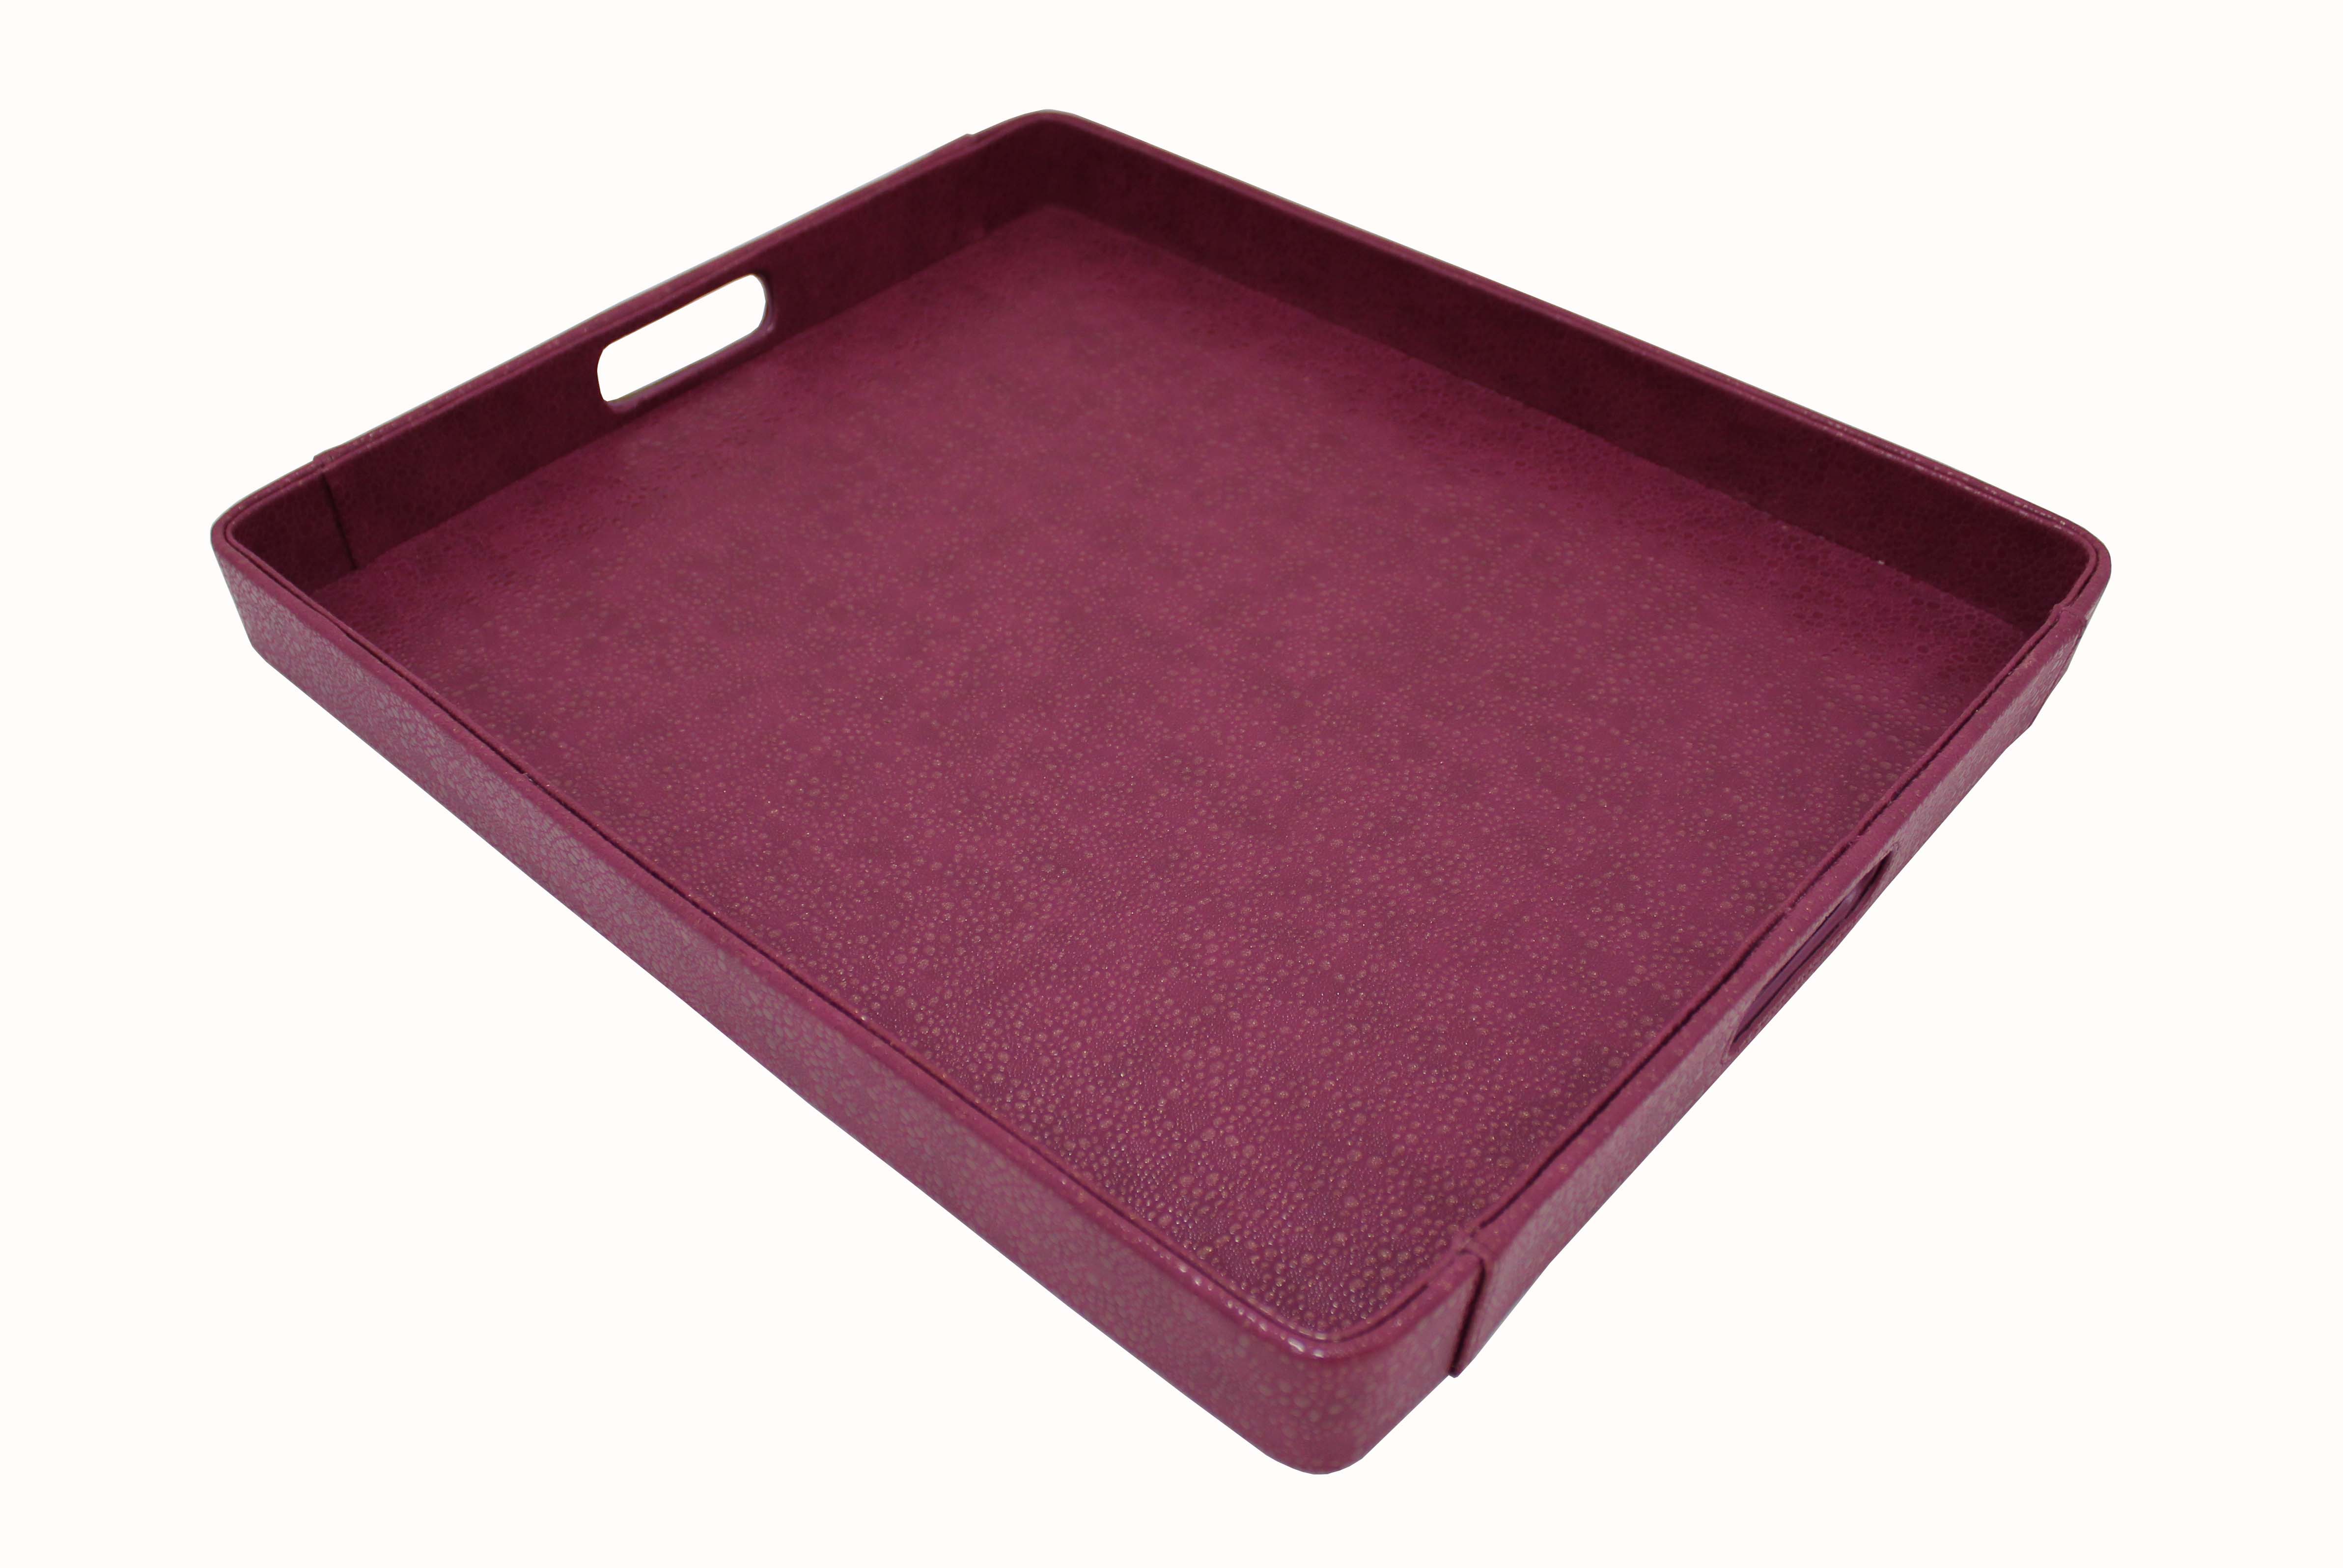 Cordays - Set of Two Serving Trays Handcrafted in Premium Quality Textured Leatherette by Cordays: Eco Home Collection